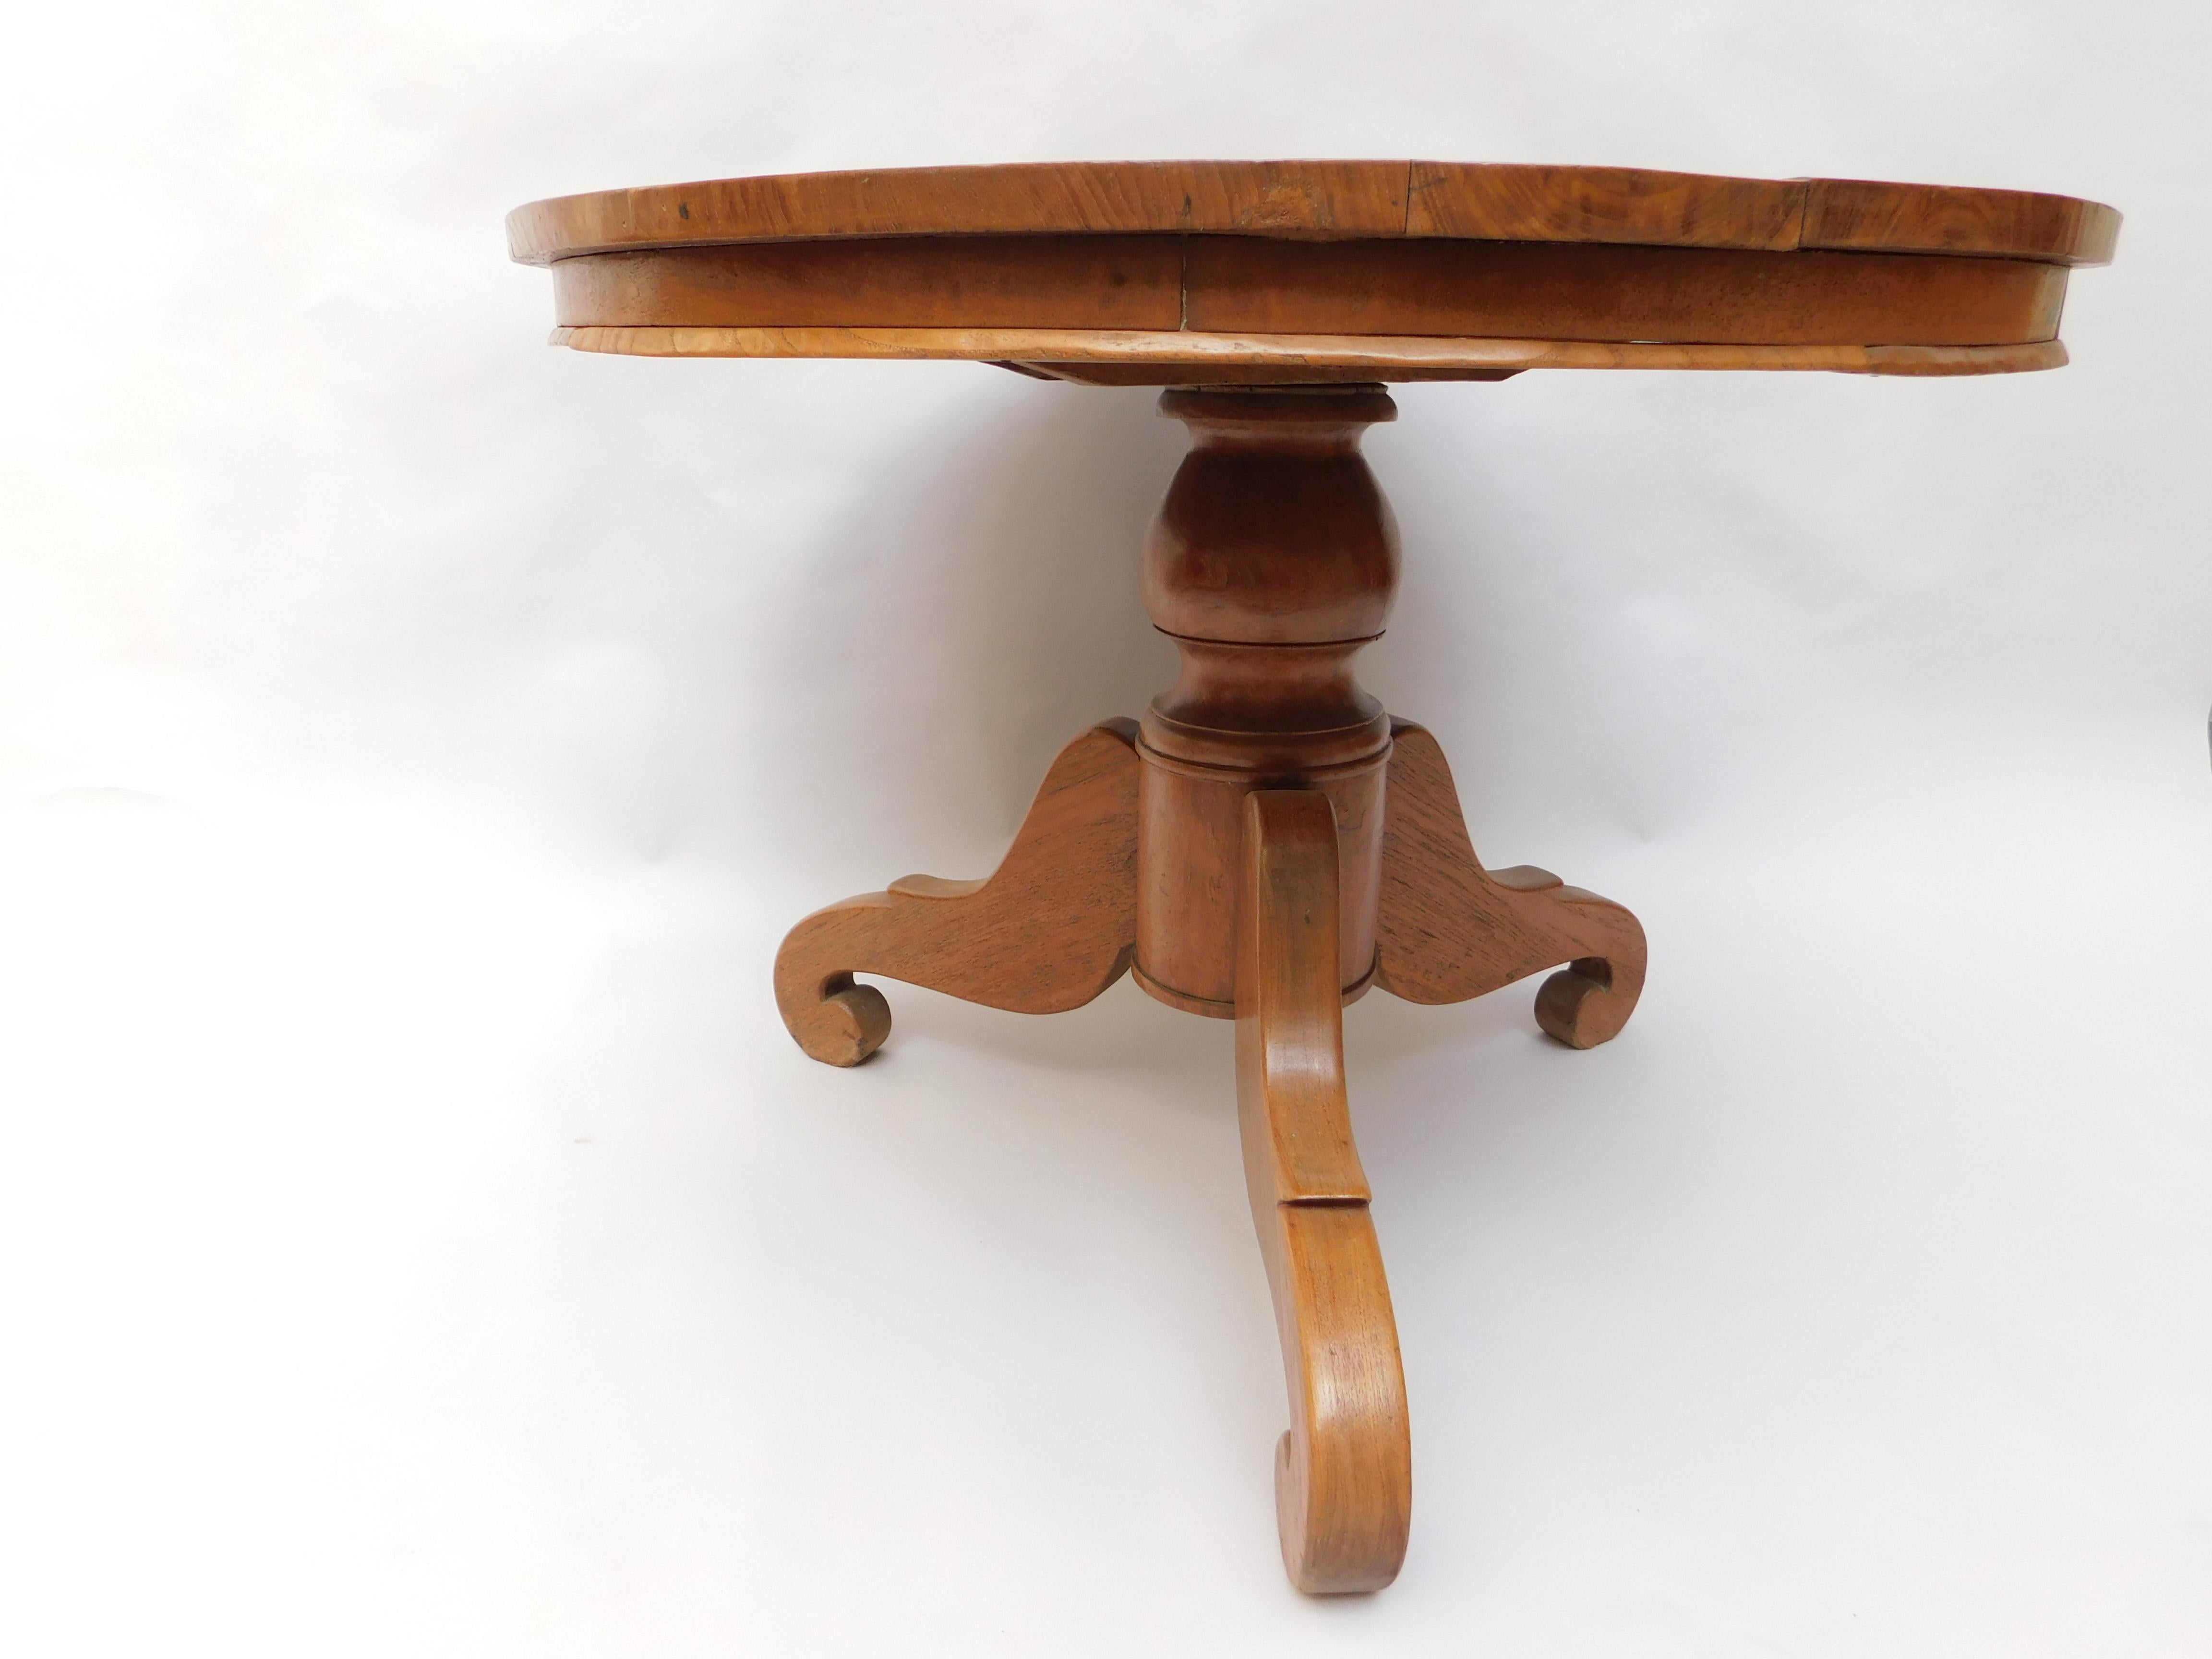 Mid-19th century French pedestal table constructed from solid cherry wood. Tripod base of solid carved cherry urn shaped pedestal supported by three curvaceous legs ending in curled feet.
The crack in the base is a normal sign of ageing and